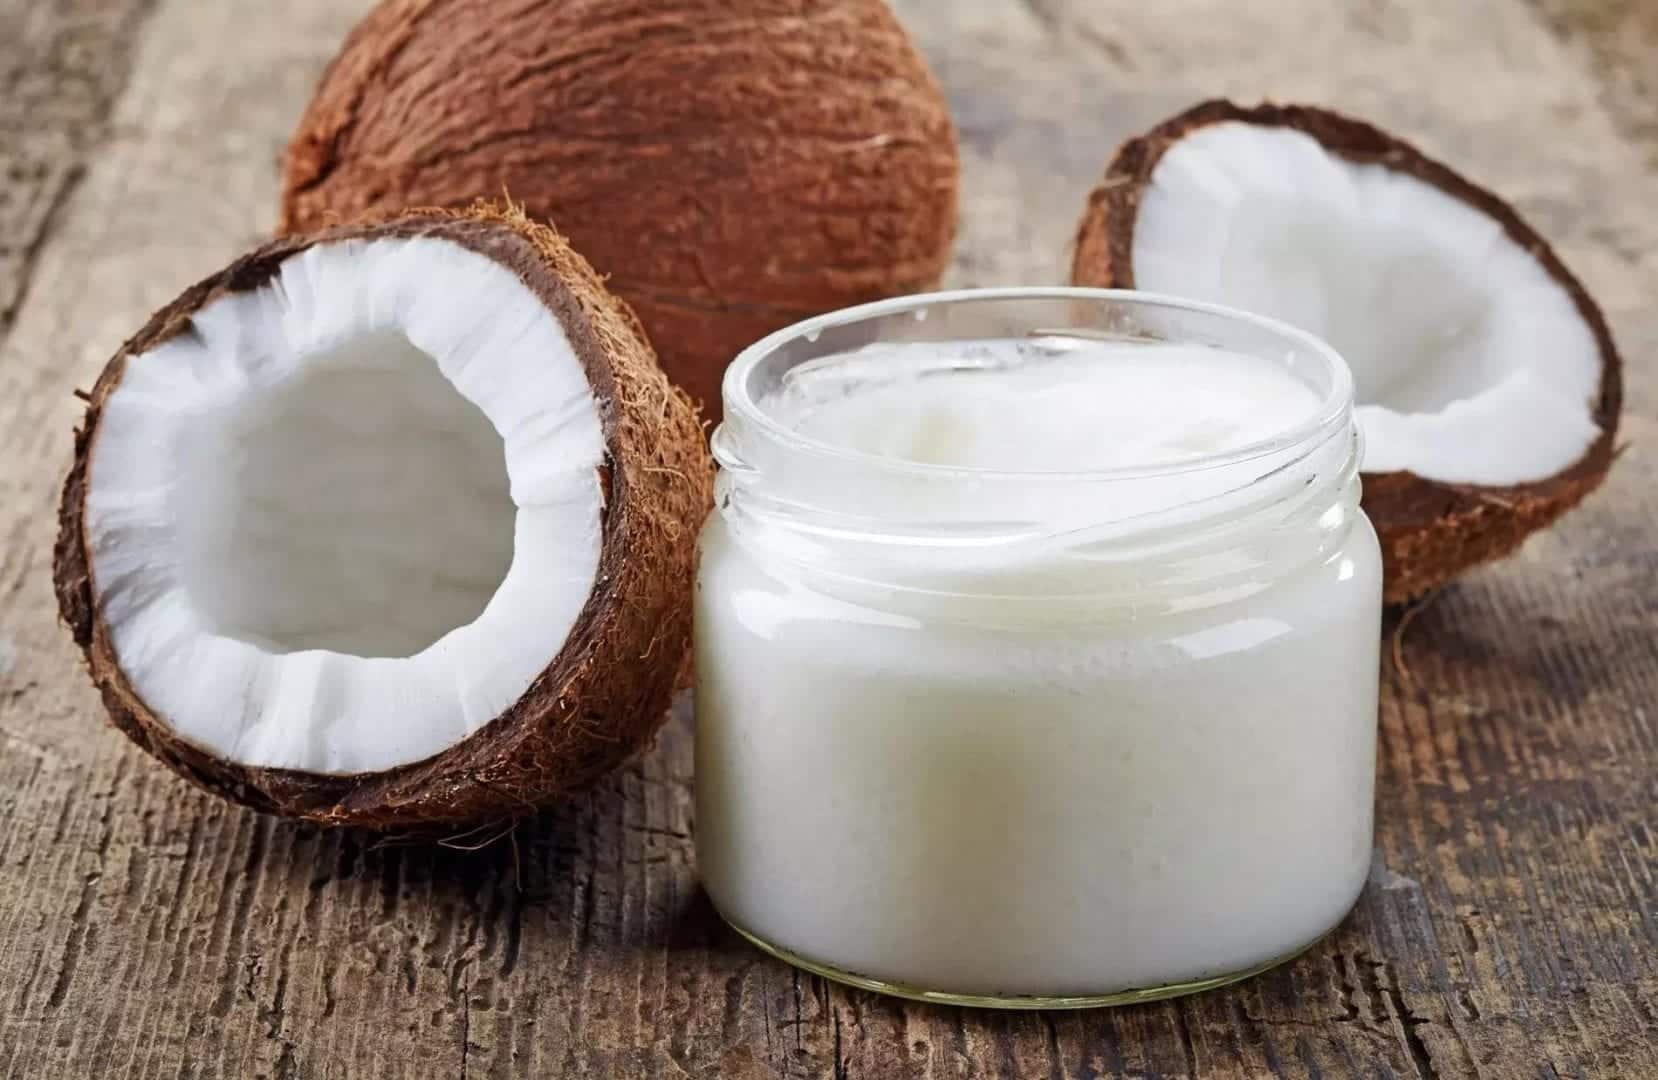 Check out 10 hydration recipes with coconut oil now